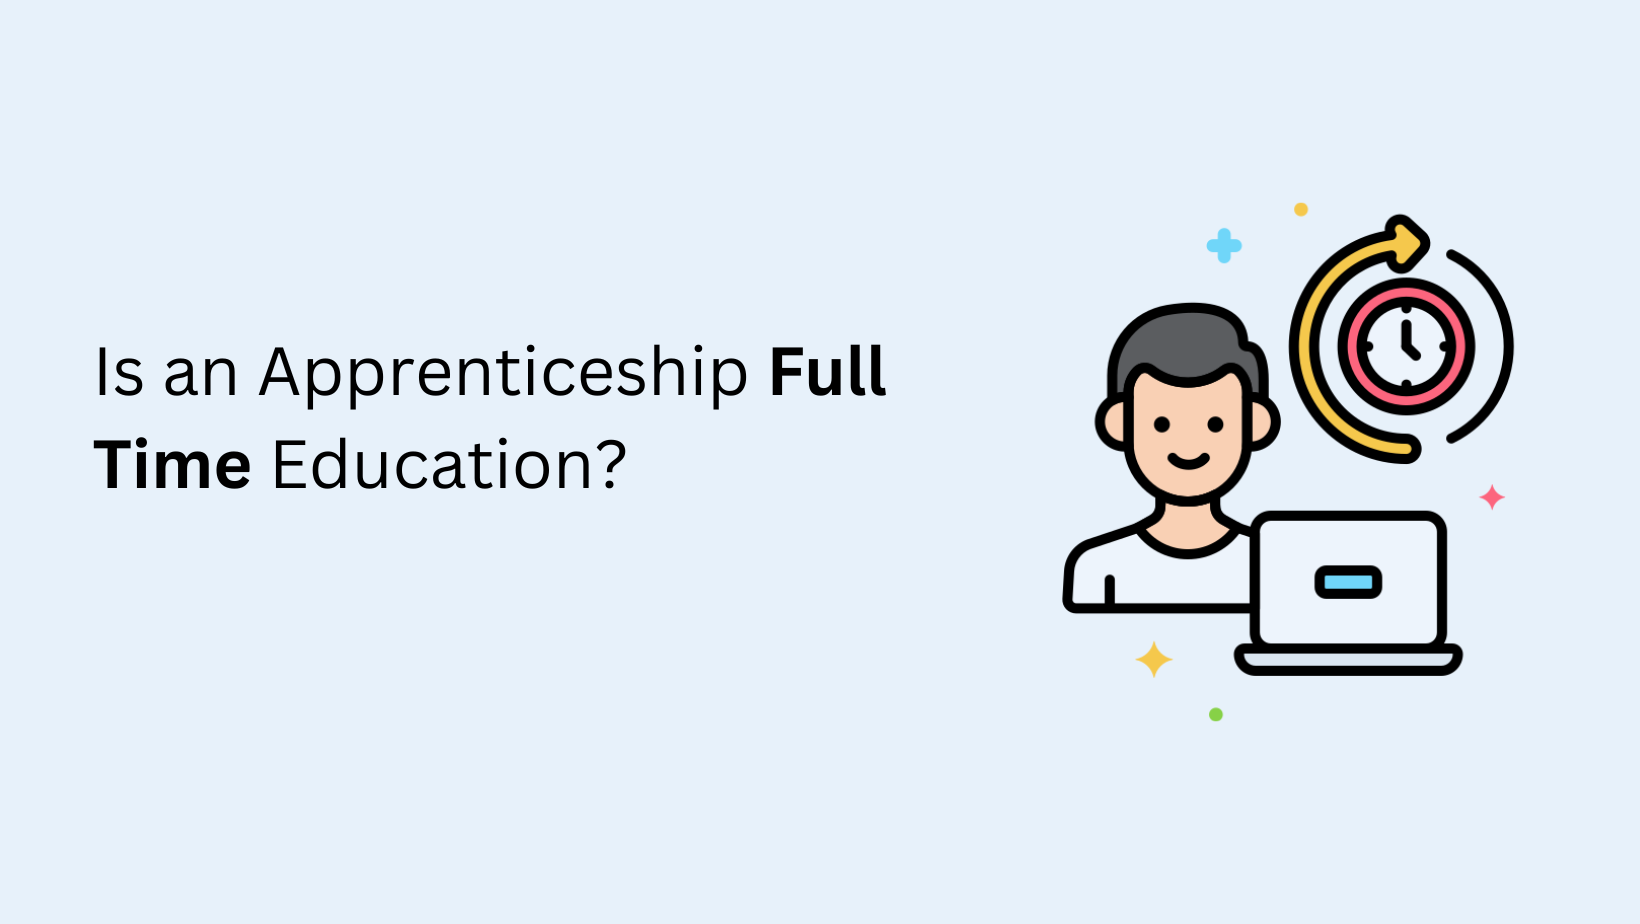 Is an Apprenticeship Full Time Education